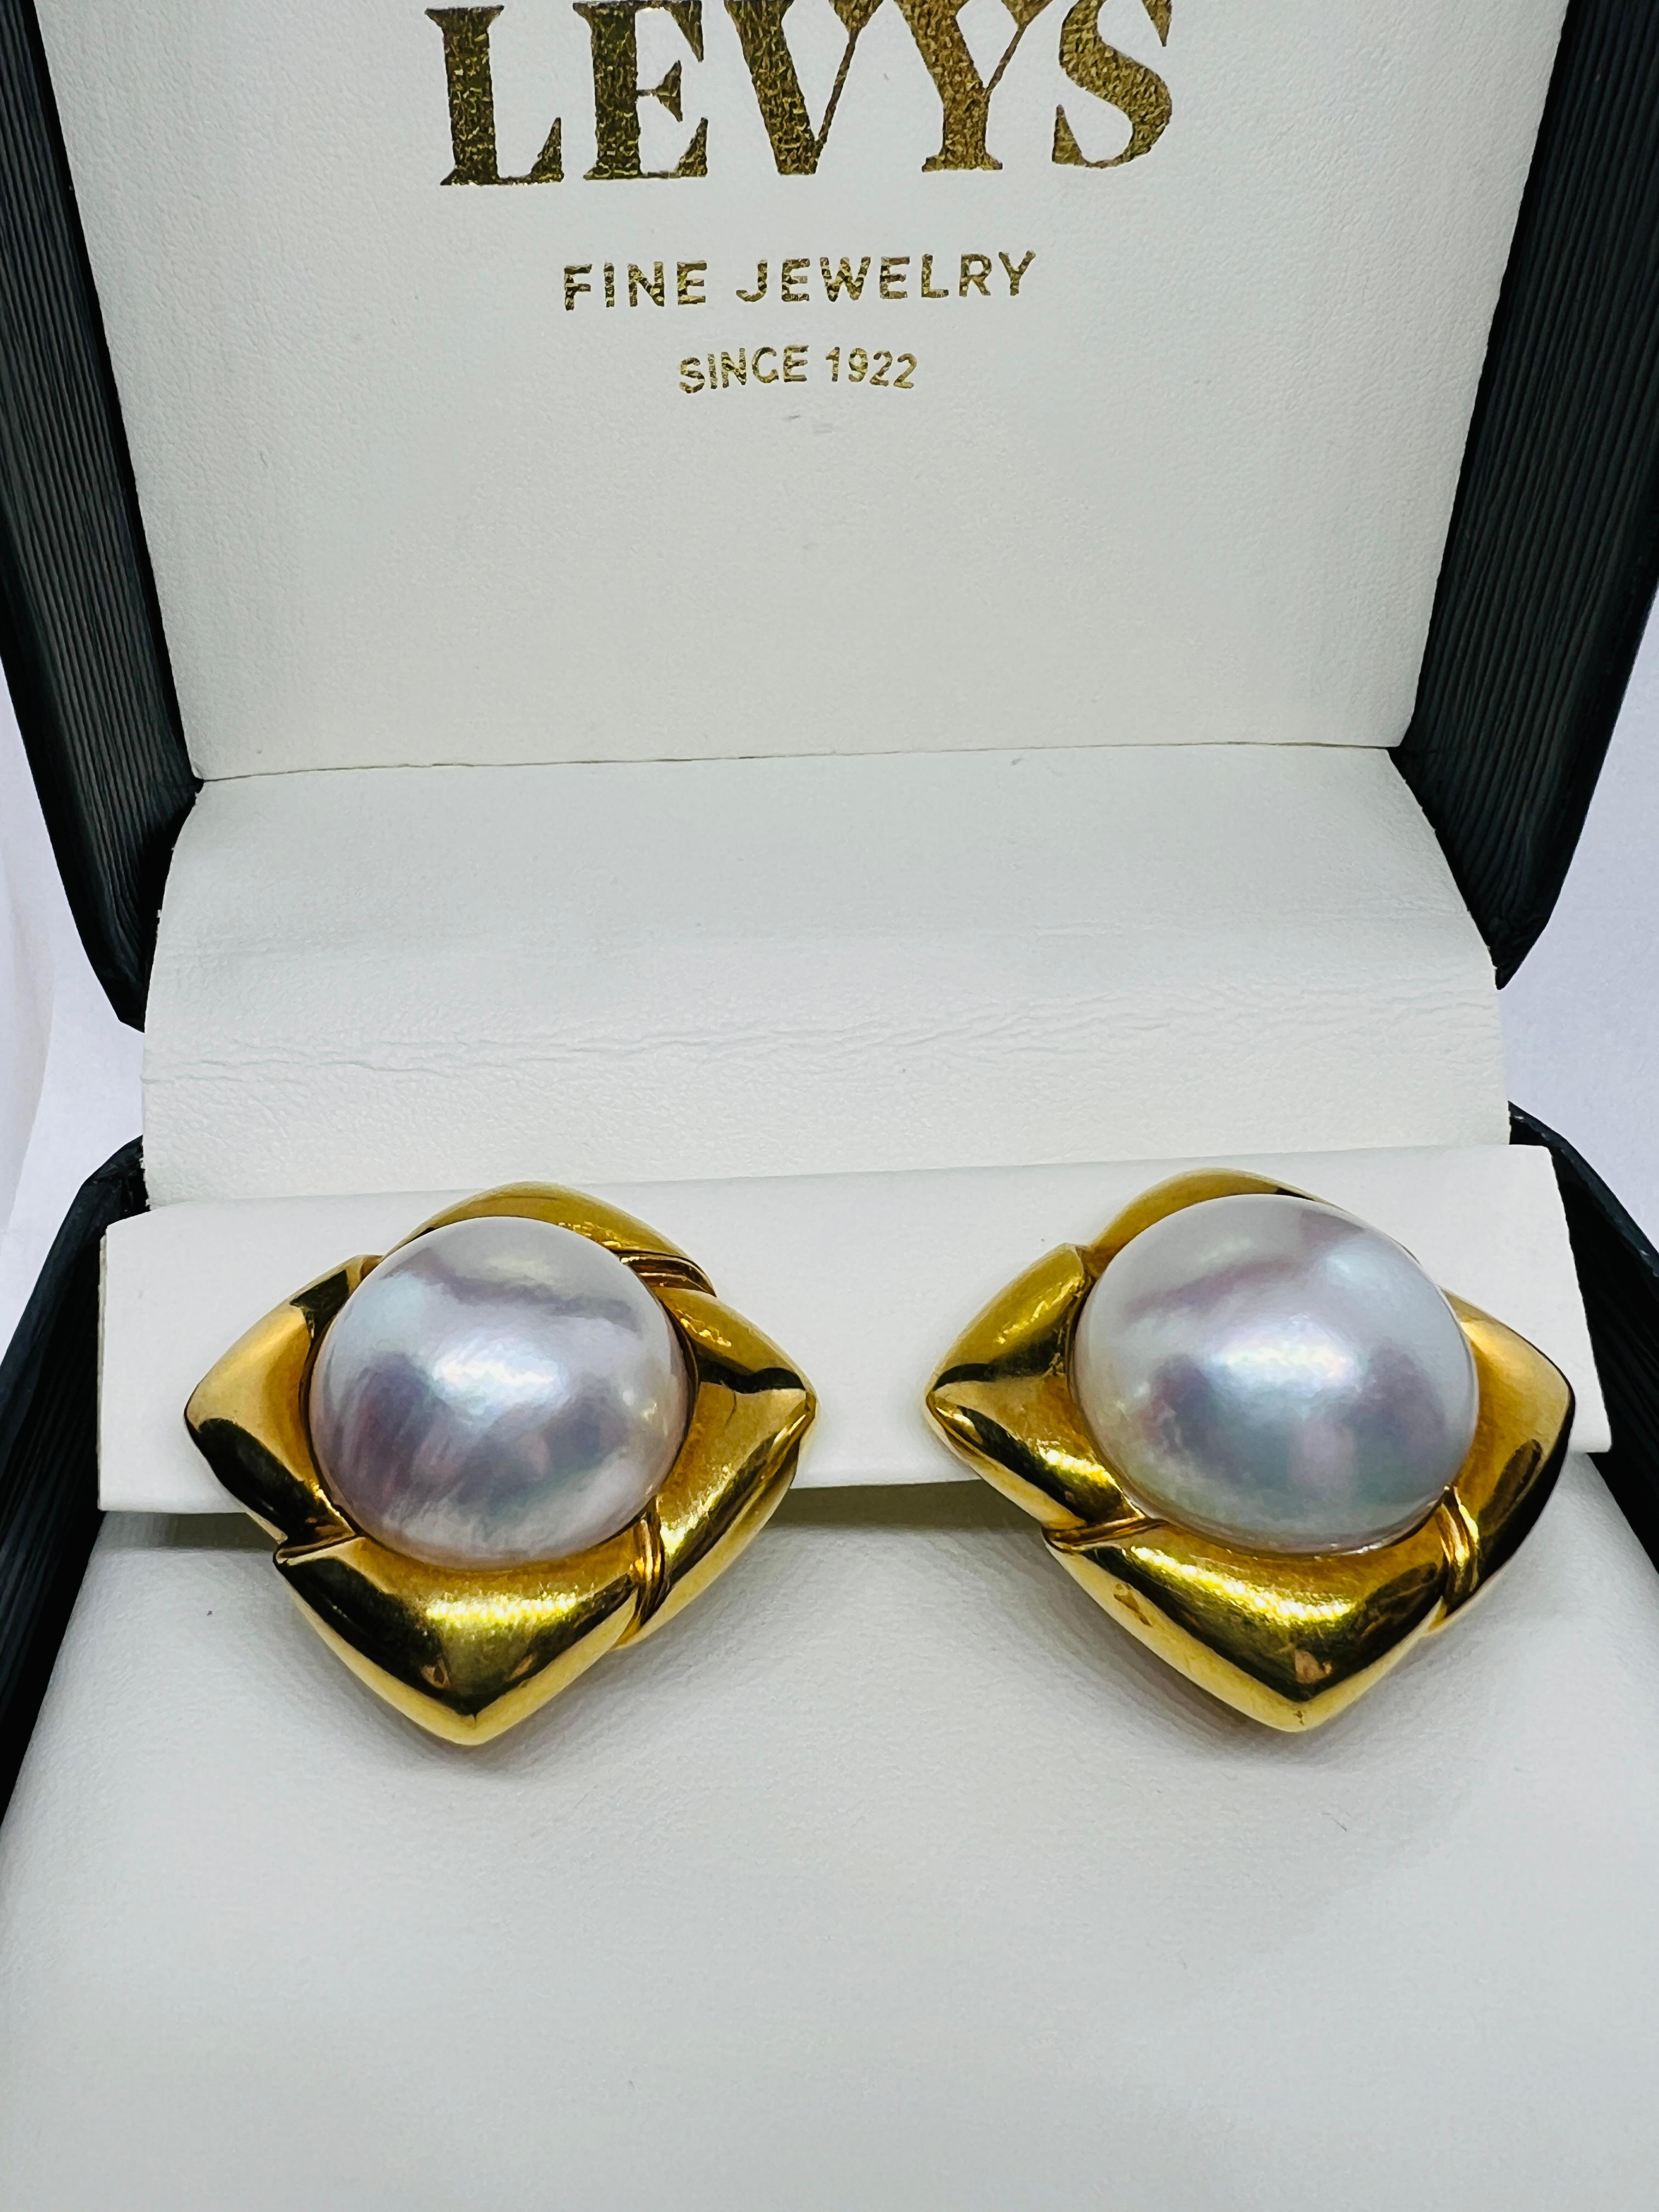 Gorgeous Hammerman Brothers Designer Earrings. These are made in 18K yellow gold and feature two stunning 8 carat More Pearls at the center. They measure one inch square and weigh 35.4 grams. Please note they do not sit square on the ear. They sit